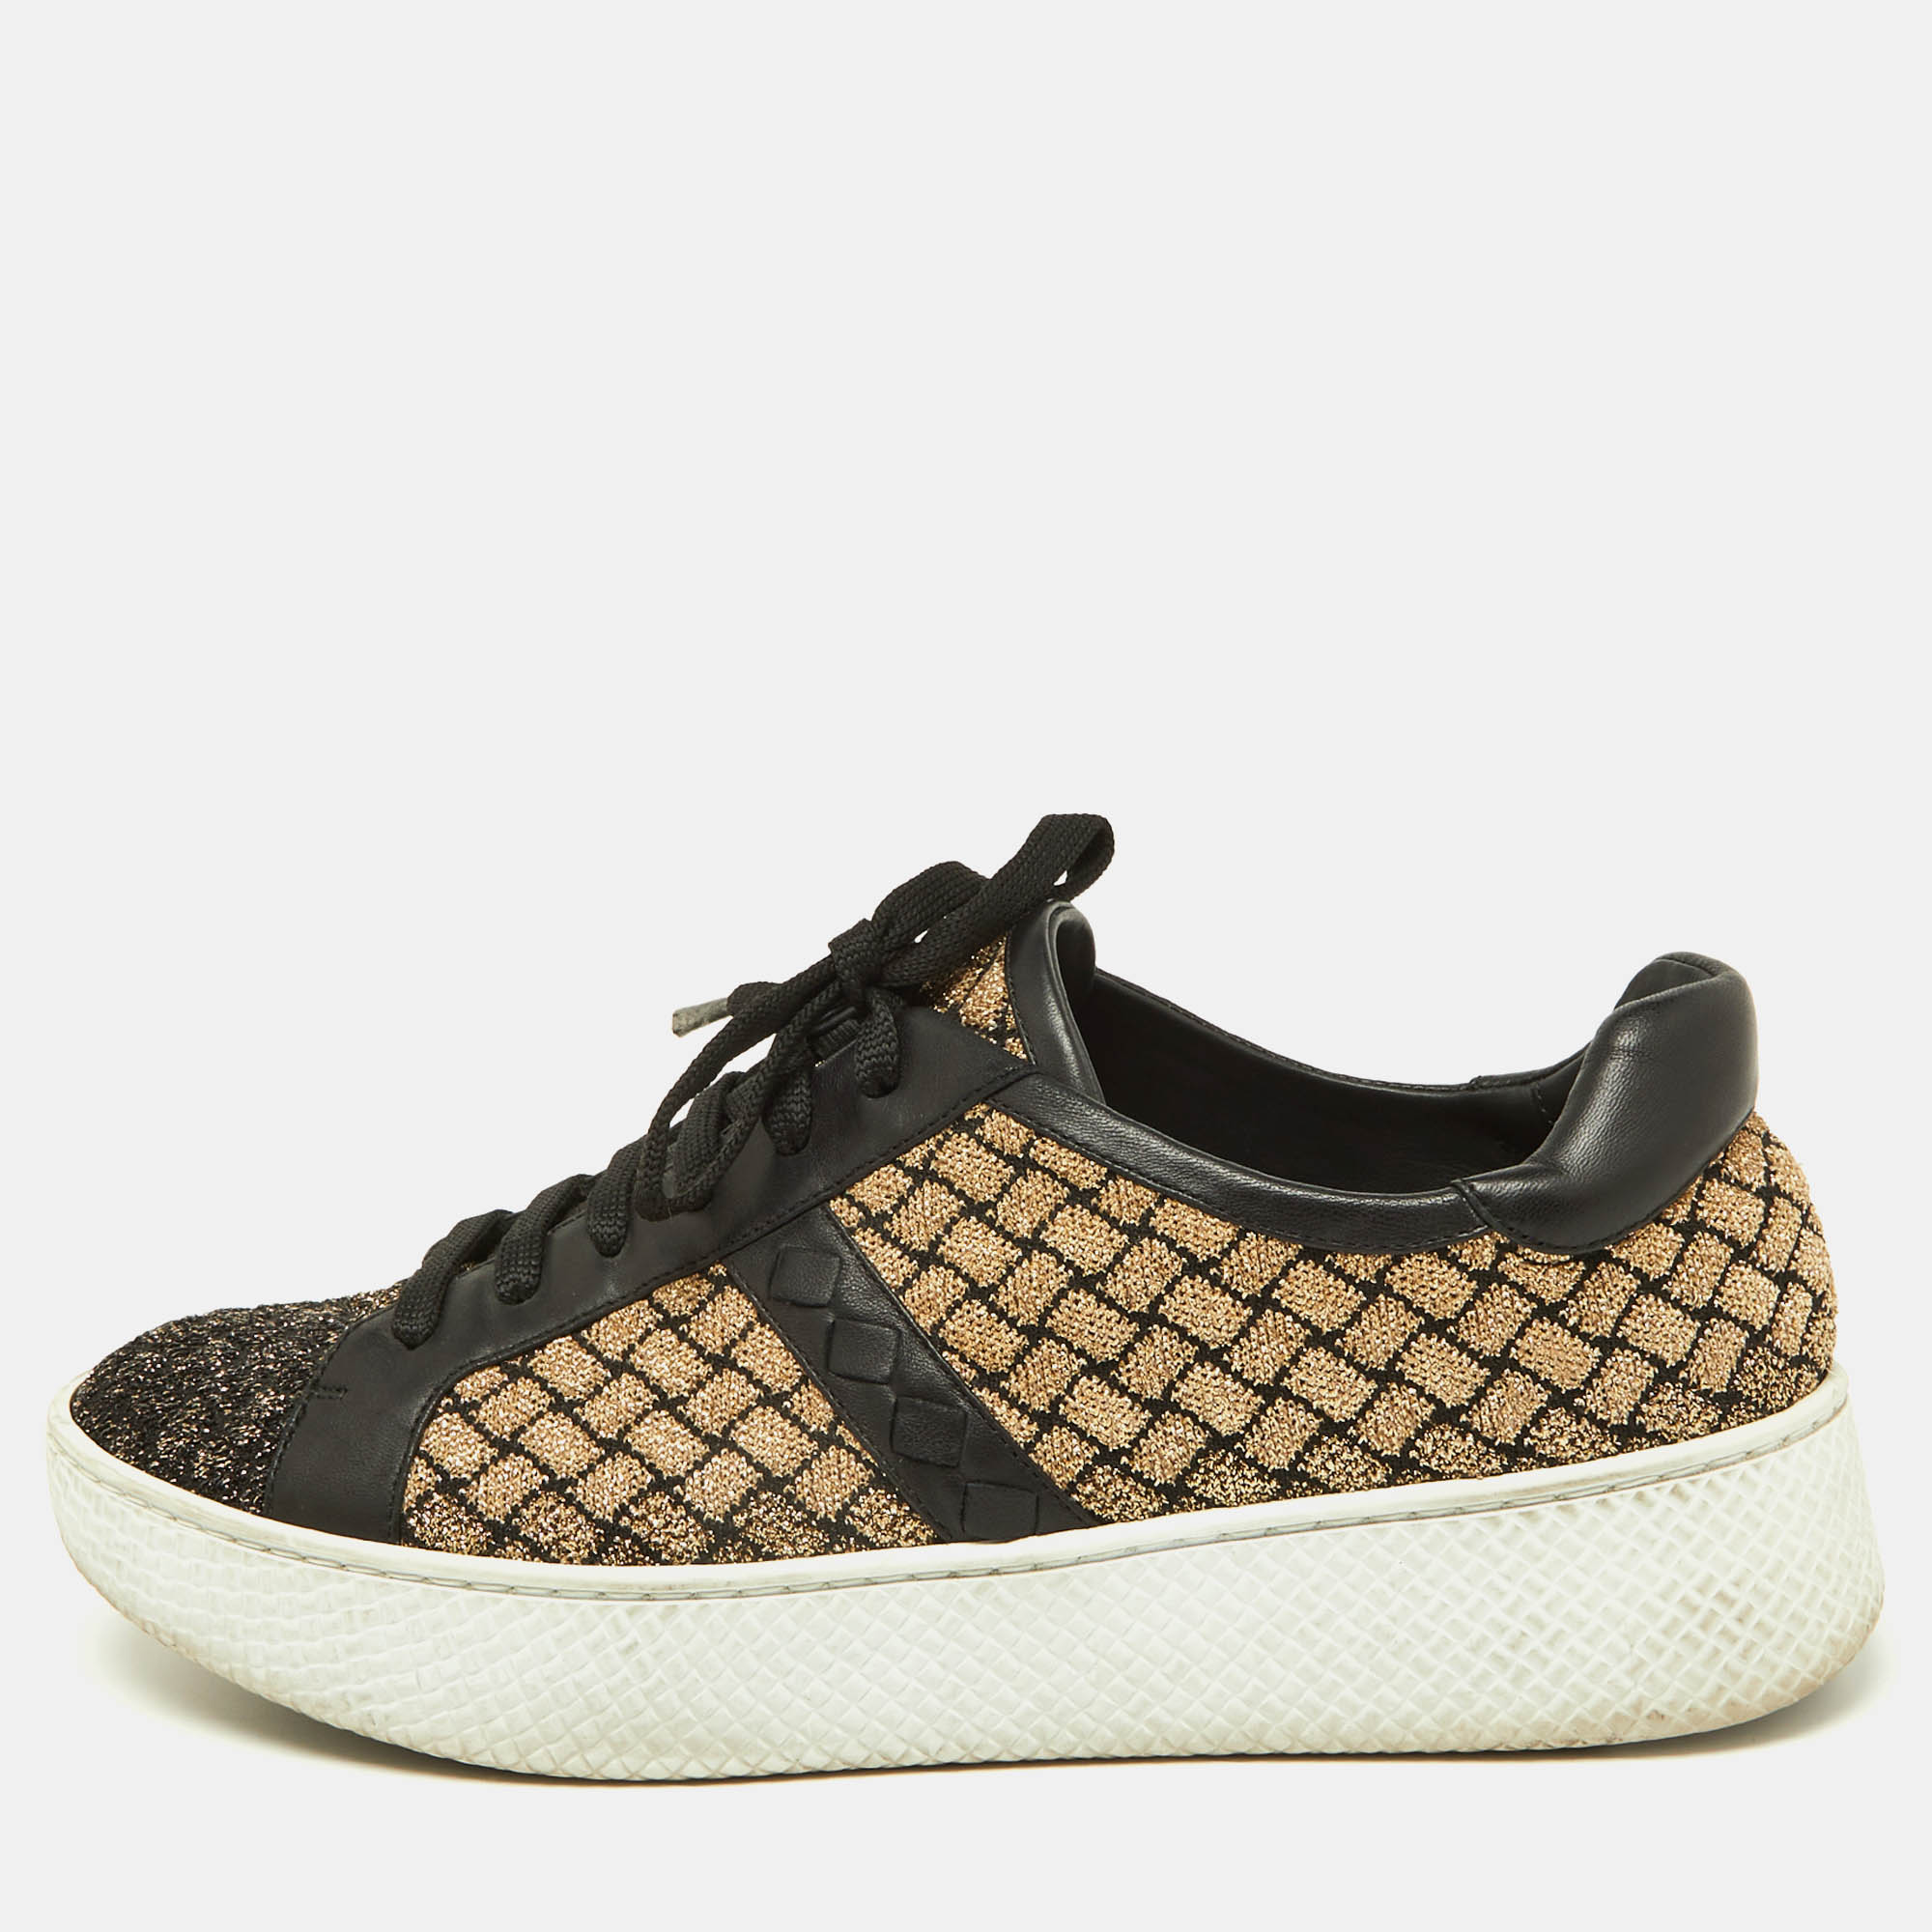 Pre-owned Bottega Veneta Black/gold Woven Fabric And Leather Low Top Sneakers Size 39.5